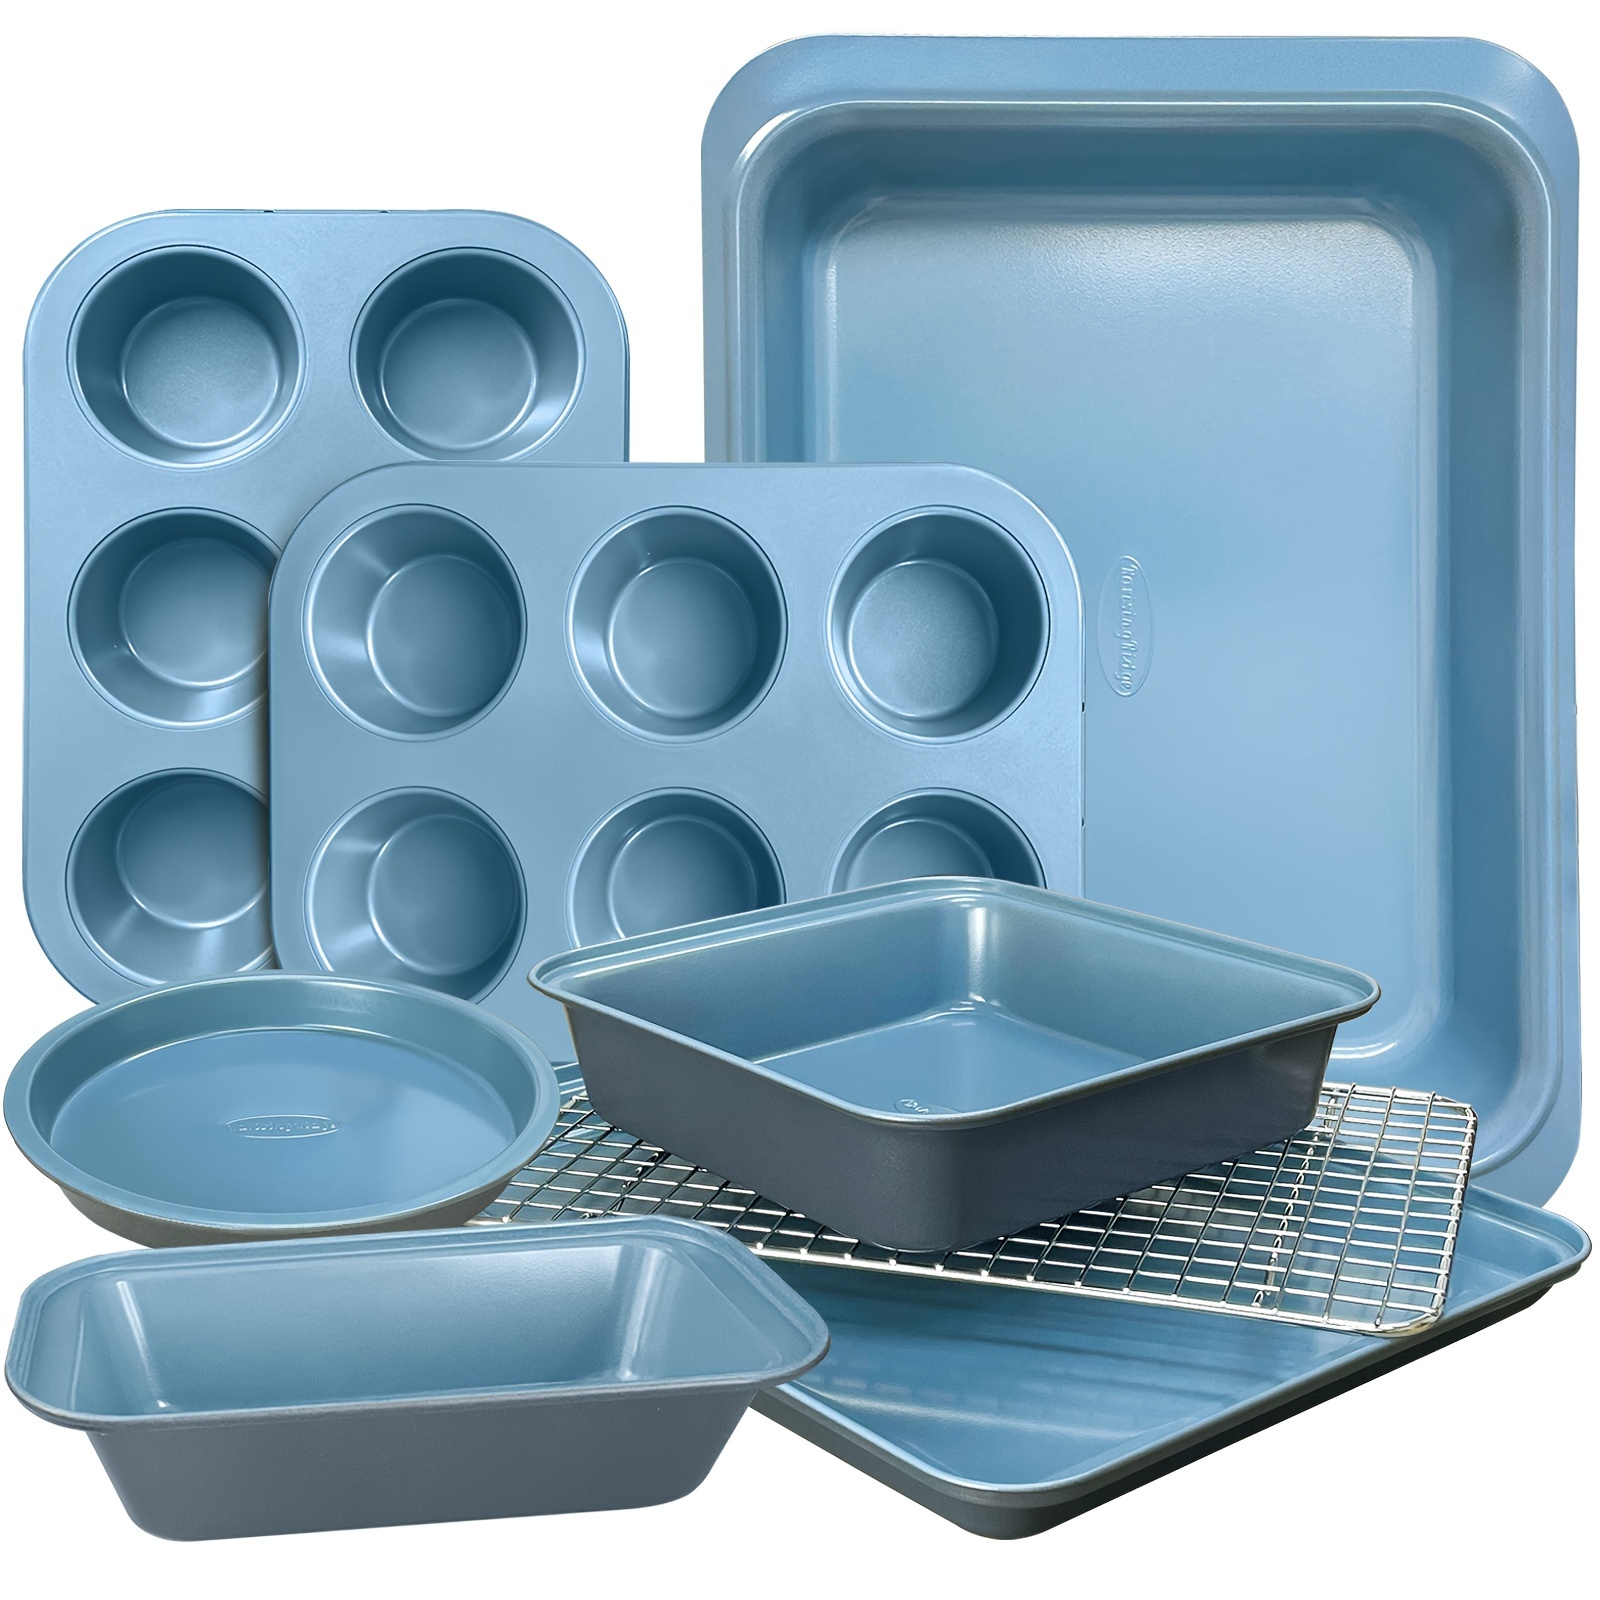 

Baking Pans Set With Nonstick Coating - Ultrathick Professional 8-piece Bi-color Pans Including Cookie Sheet, Muffin, Cake Pans, And Cooling Rack - Heavy Duty, Dishwasher Safe